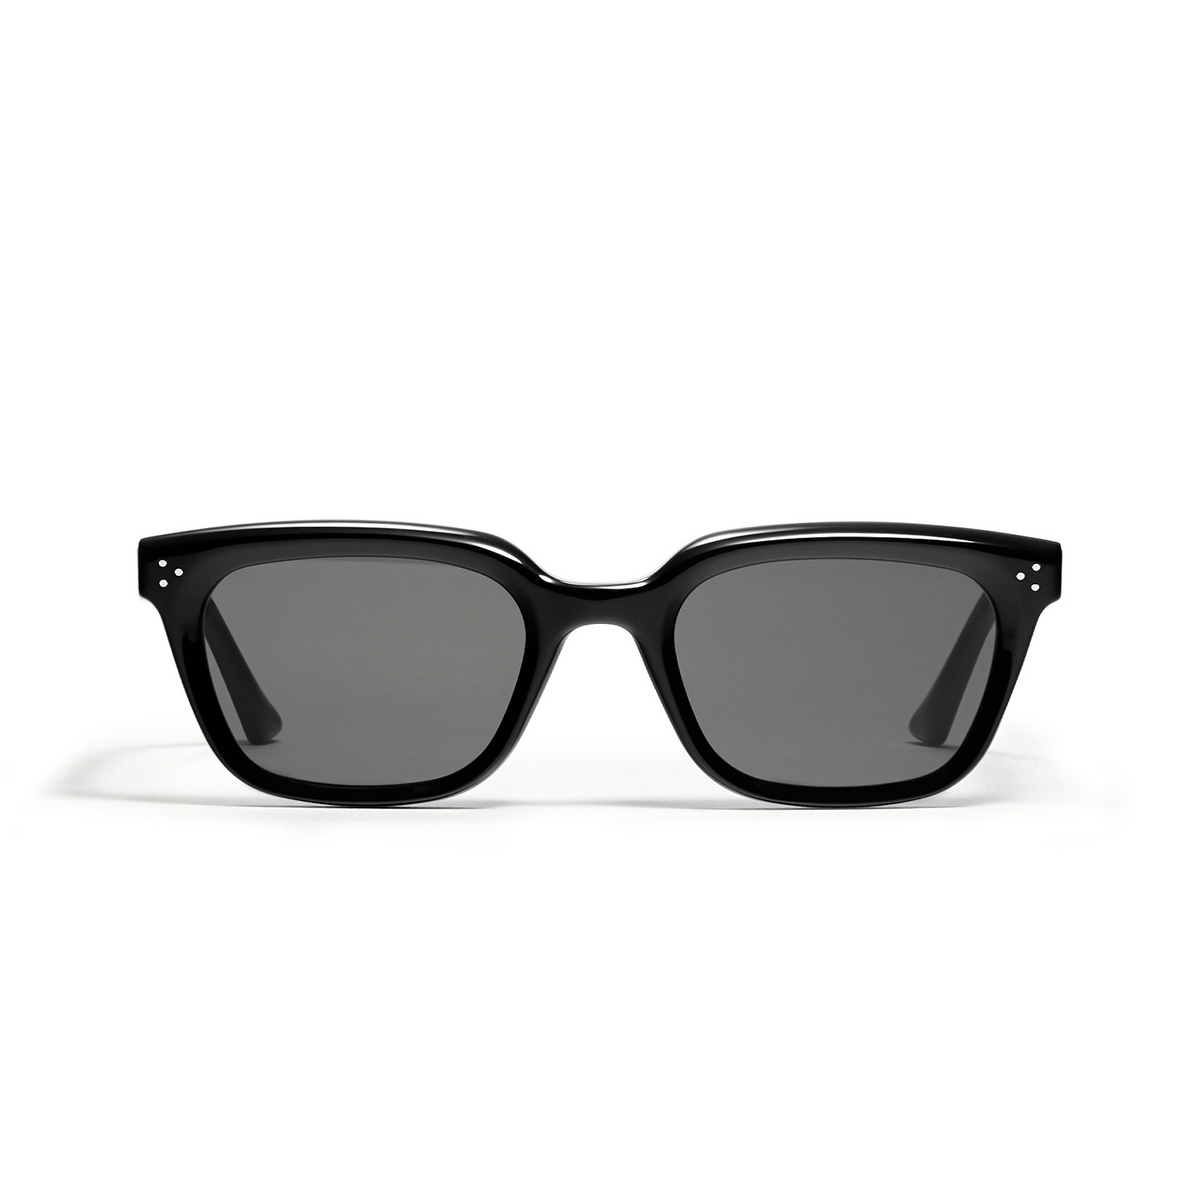 Gentle Monster MUSEE Sunglasses 01 Black - front view